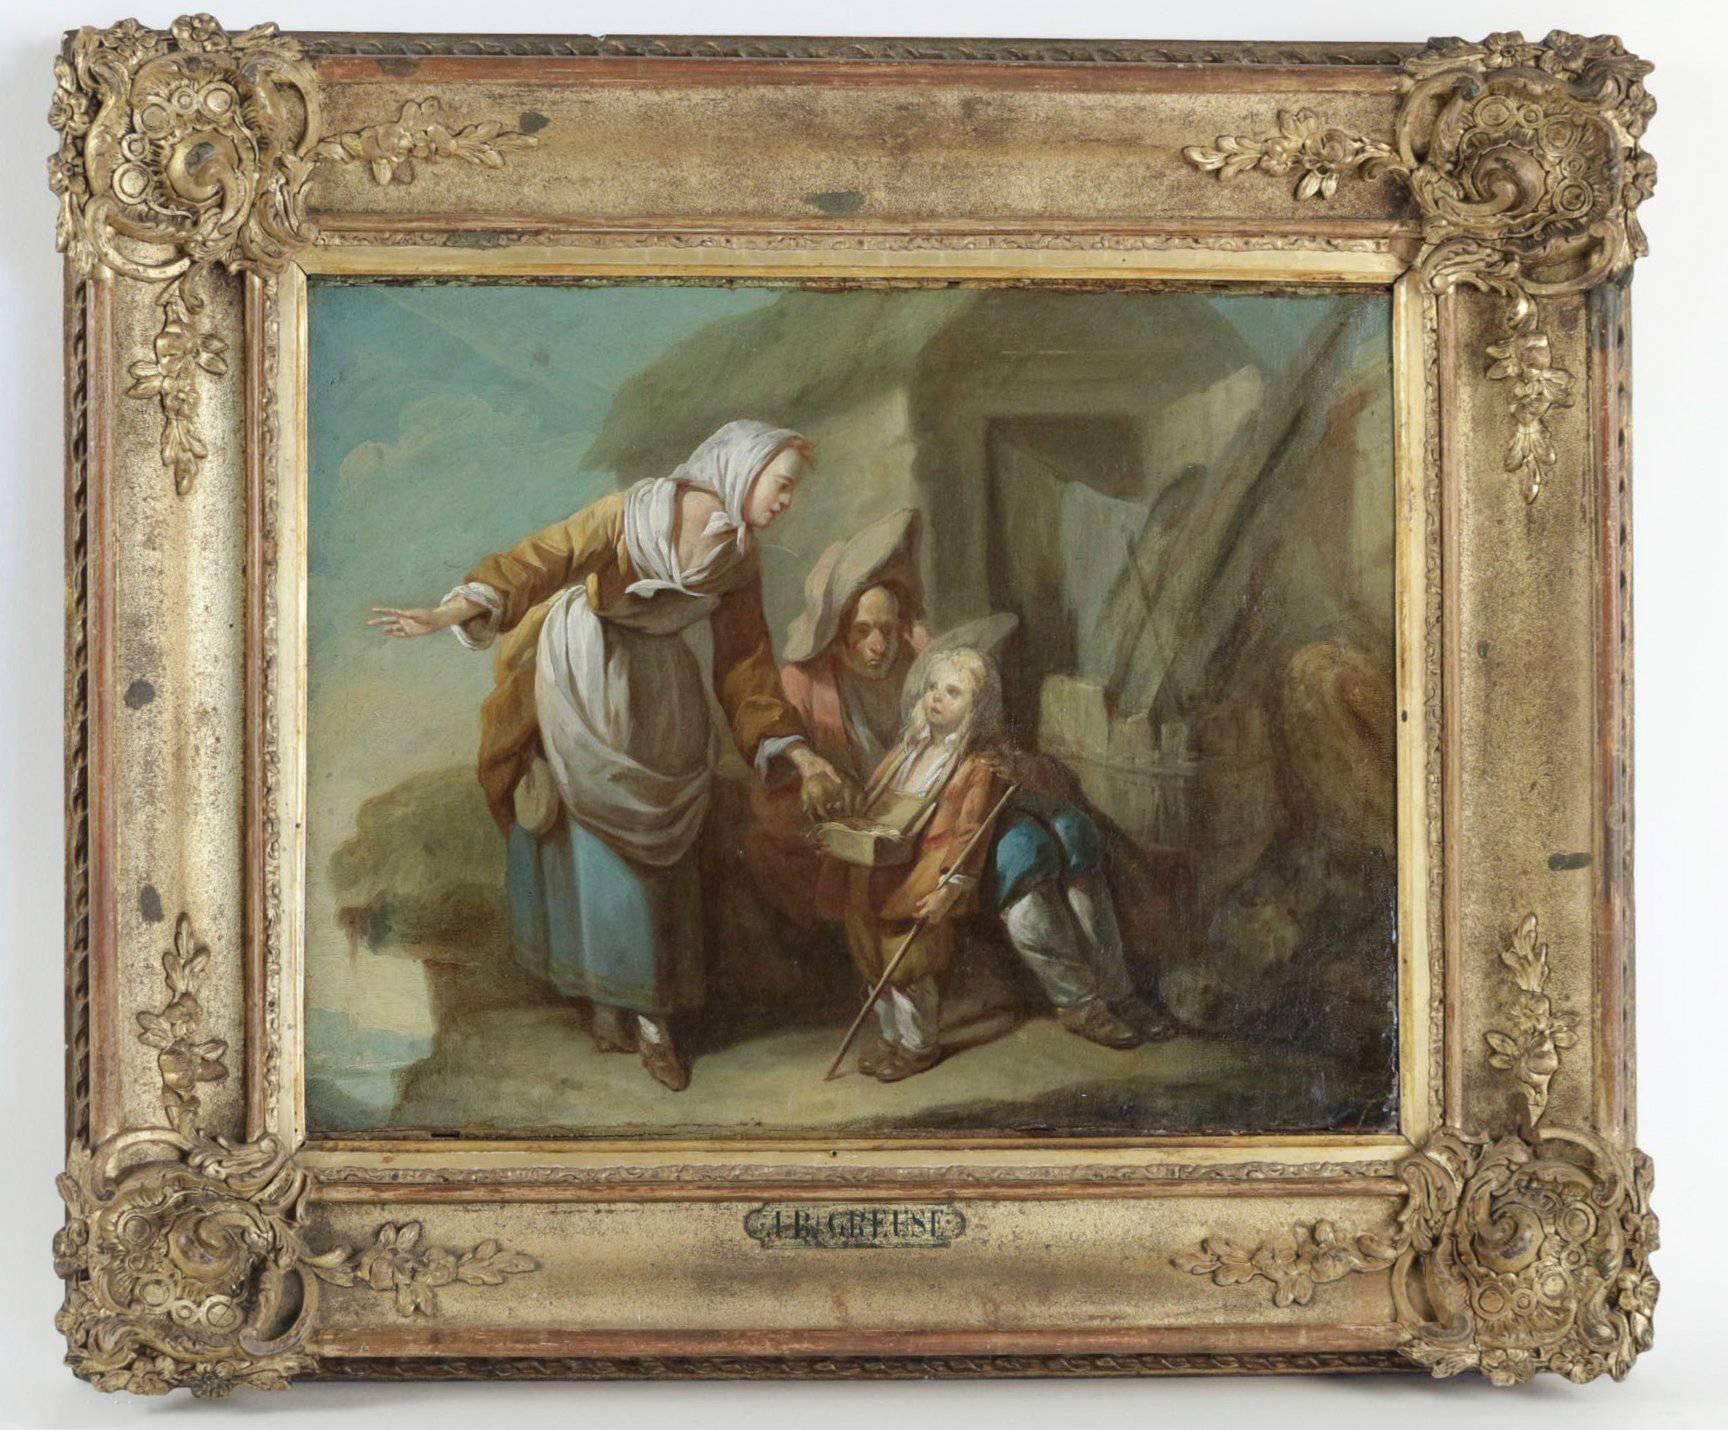 Very fine quality on this charming painting. It depicts ''The Departure'' in the manner of a French drawing by Jean Baptiste Greuze made in 1770 ''The Departure From Barcelonnette''.

French school, Romantic period, late 18th century in the manner